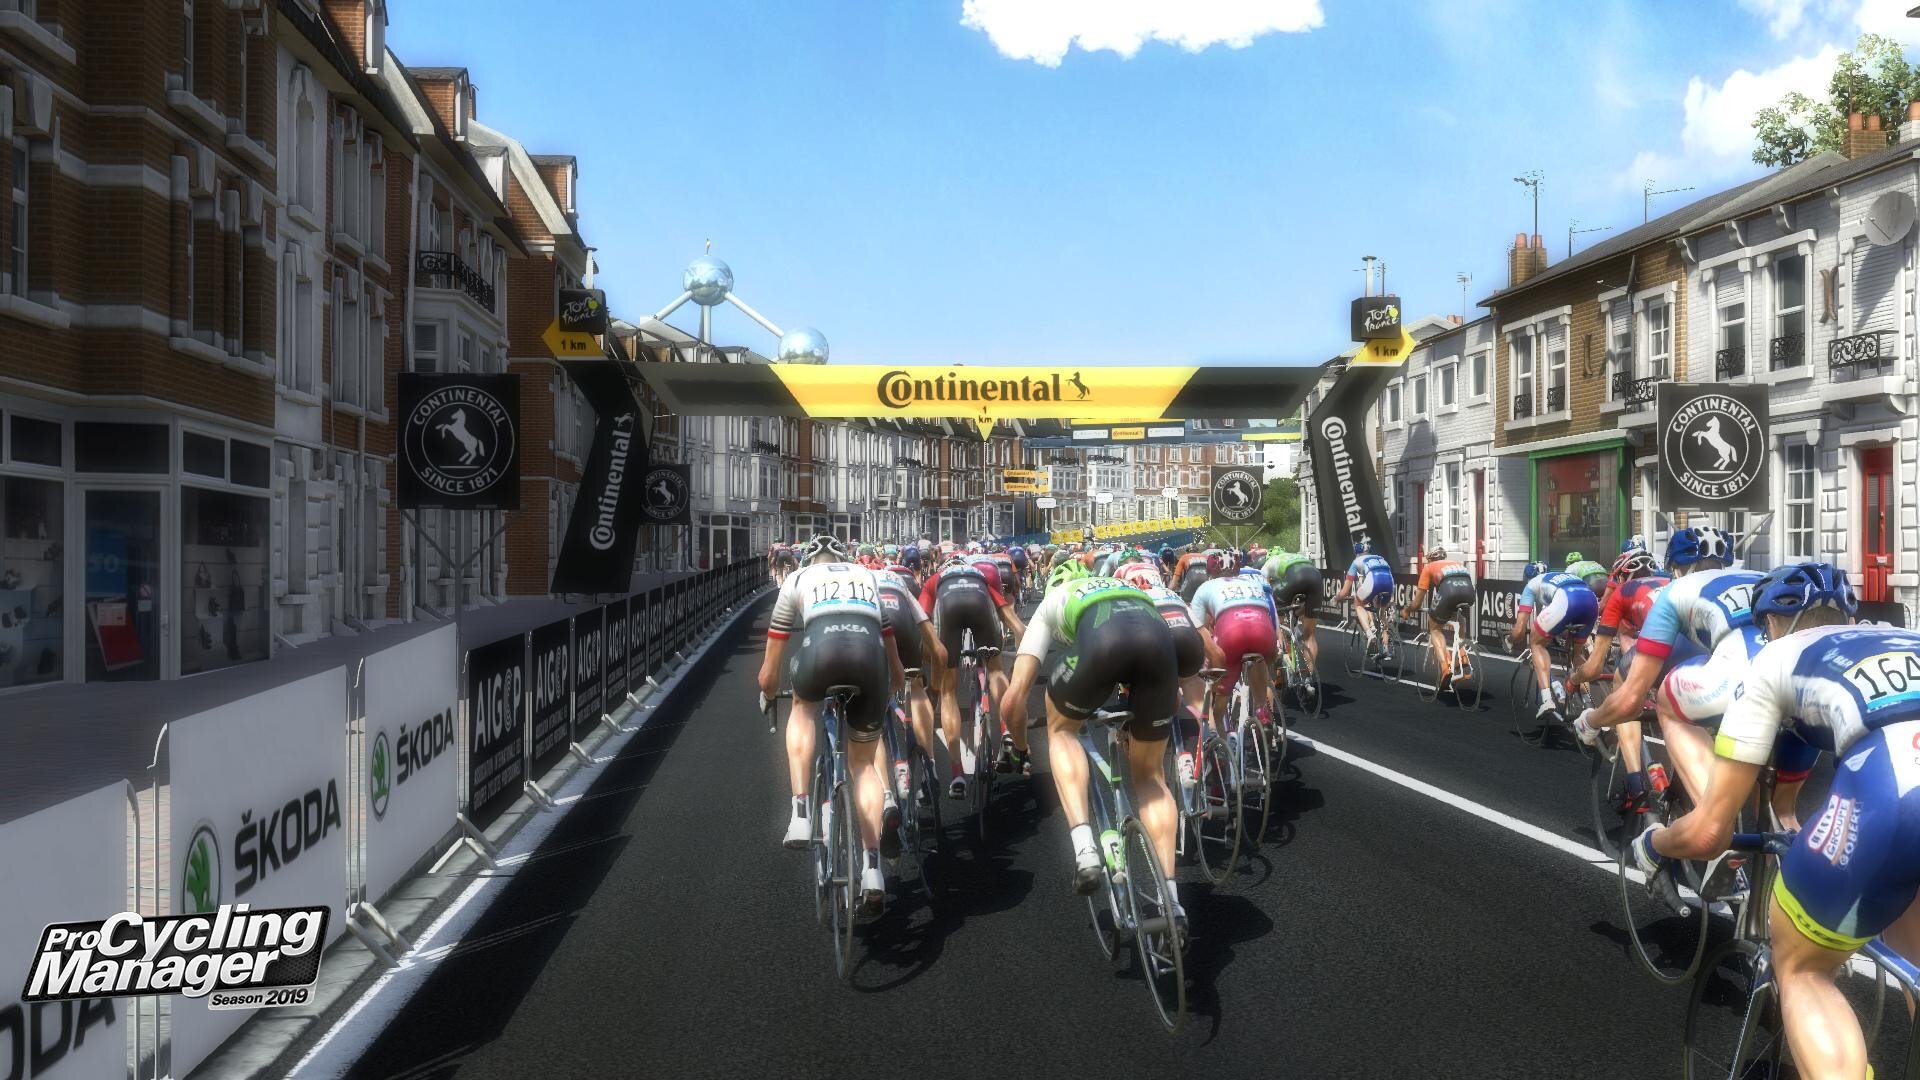 How long is Pro Cycling Manager 2020?